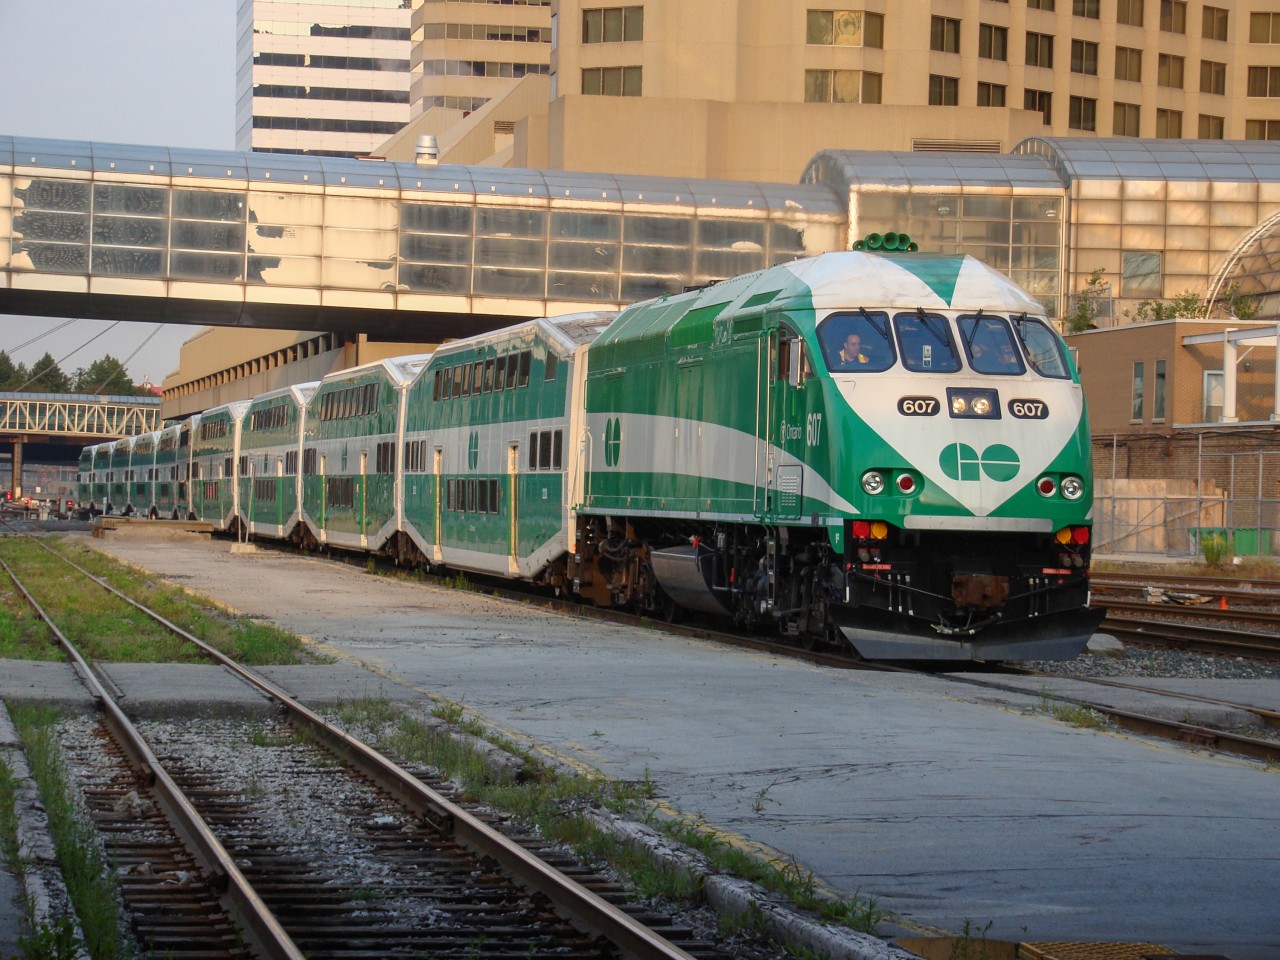 Still one of the newest members of the fleet at the time, GO 607 is leading a train into track 5 at Toronto Union Station.